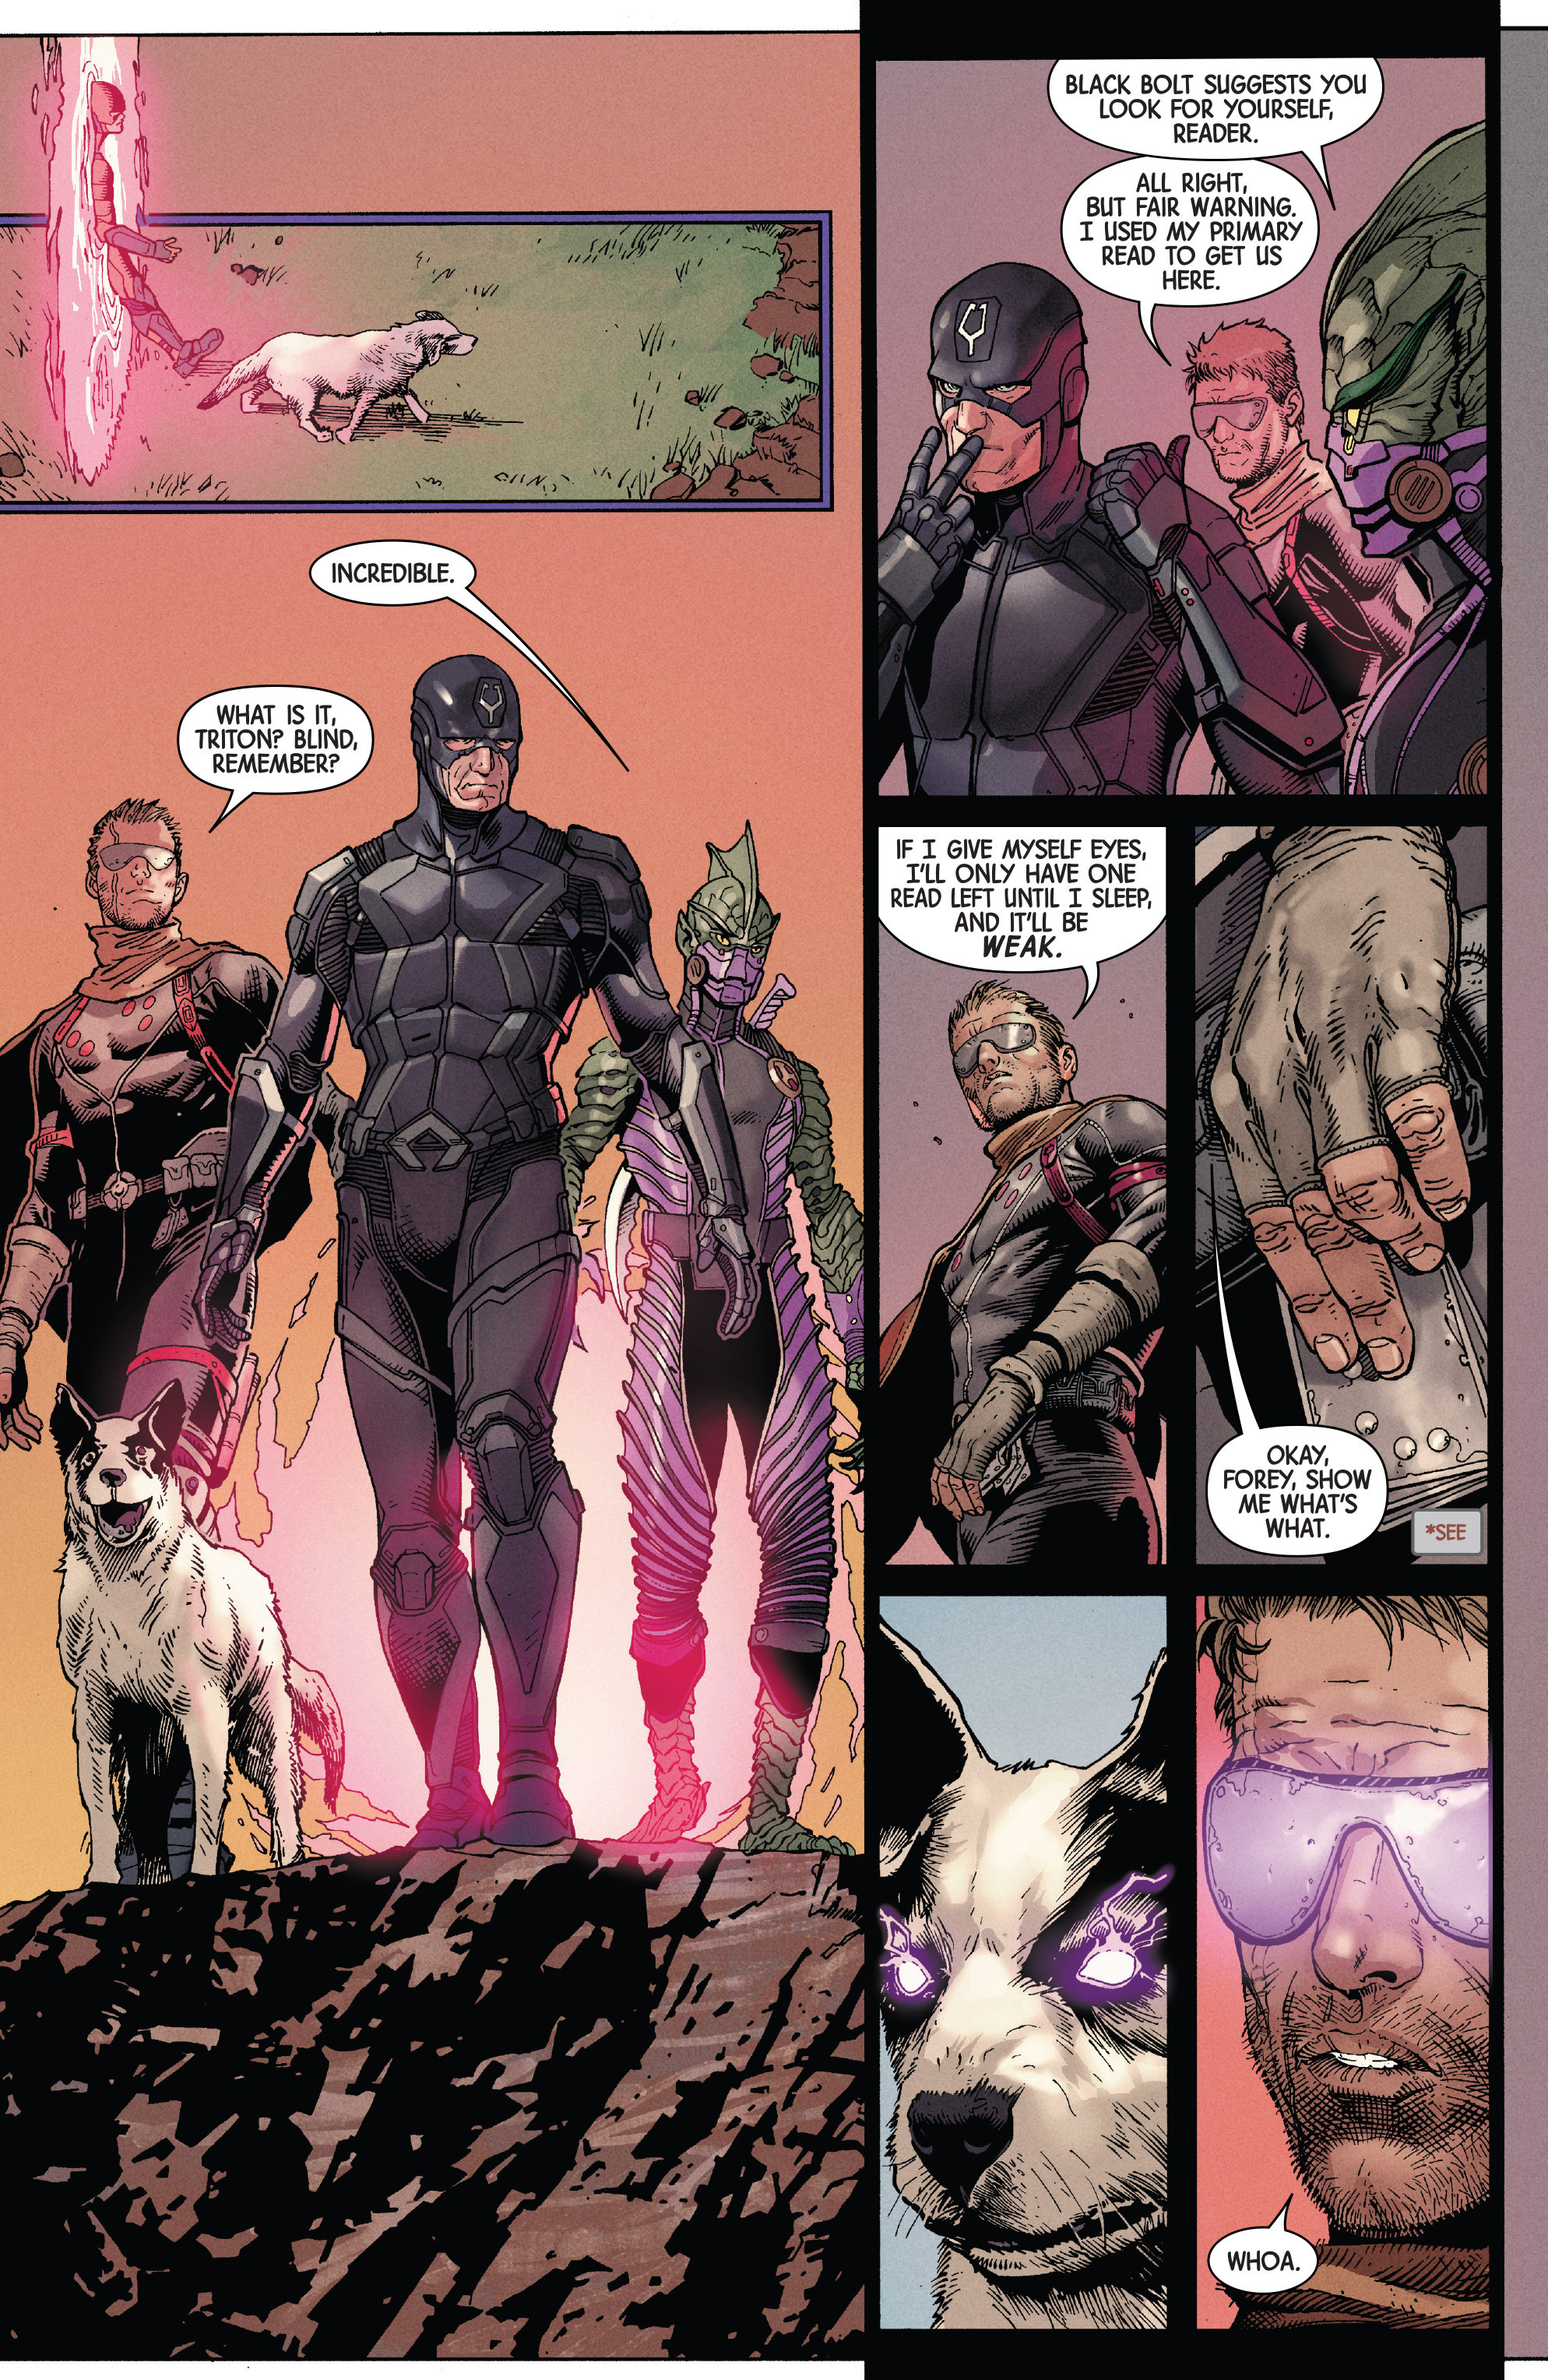 Uncanny Inhumans (2015-): Chapter 1 - Page 2